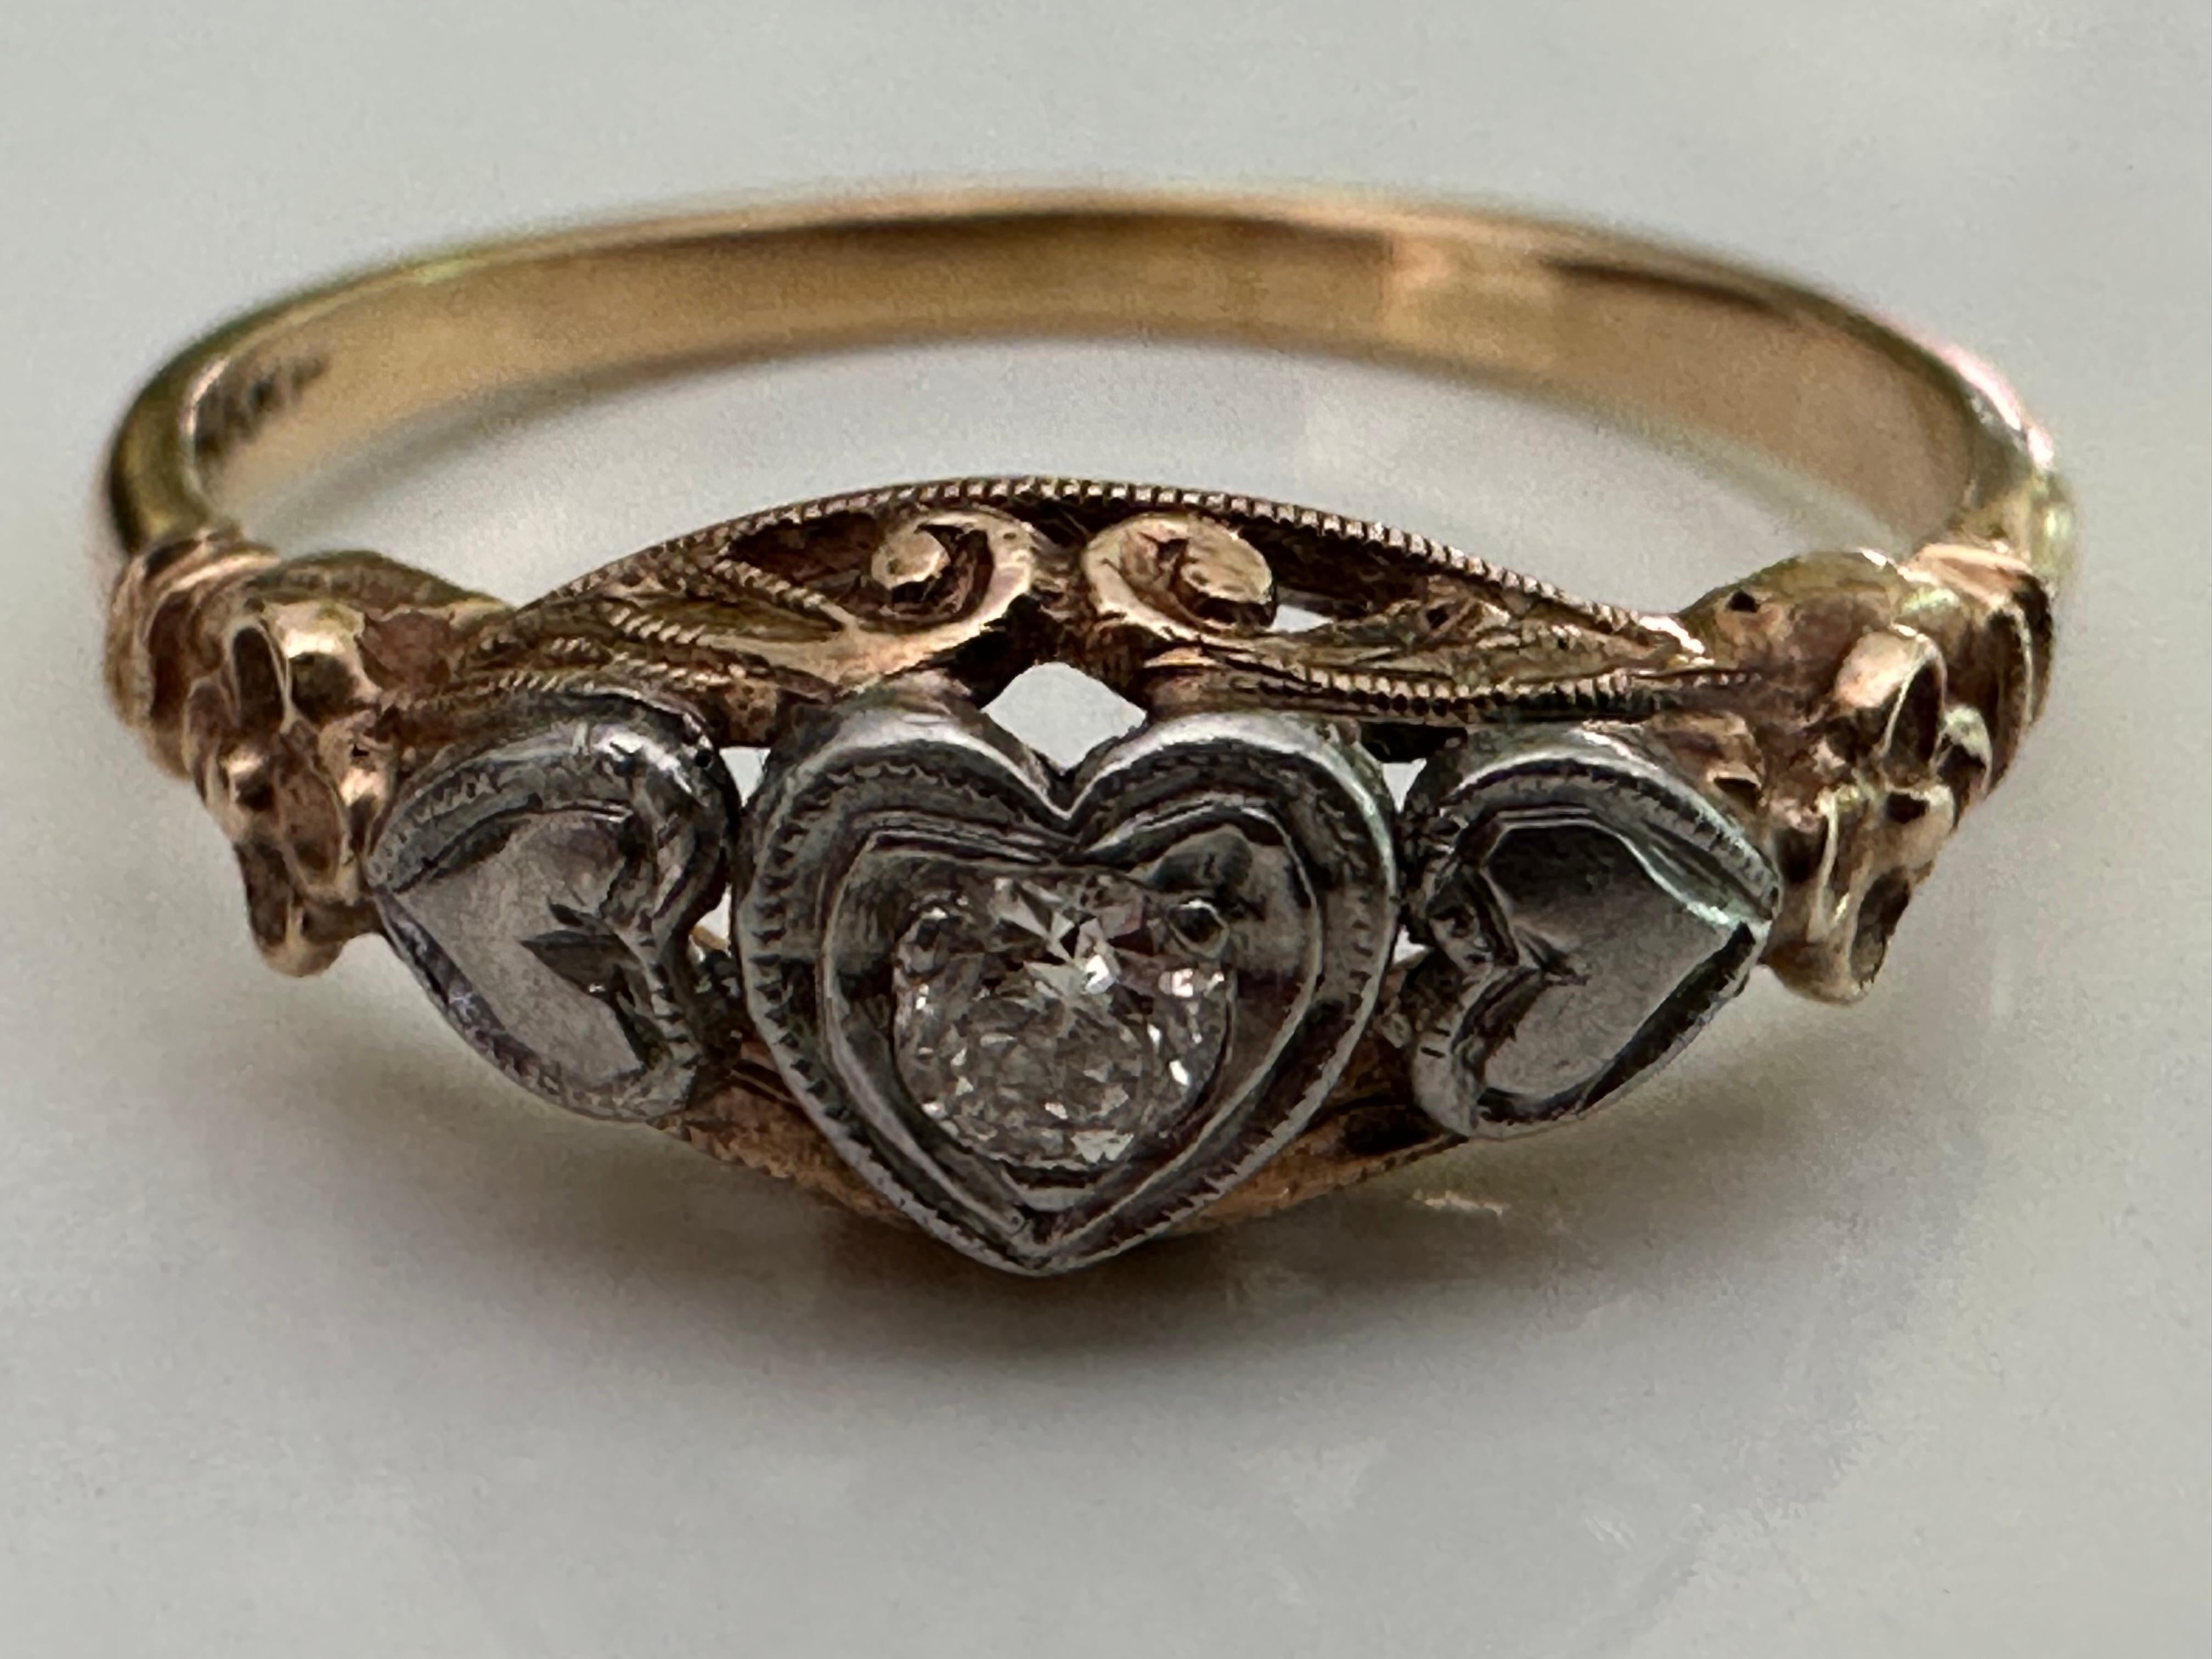 This delicate ring features a 0.05-carat Old European cut diamond center stone, H color, VS clarity, set within a platinum heart-shaped collet setting and fashioned in a 14K yellow gold filigree band.  Circa late 19th century. 


